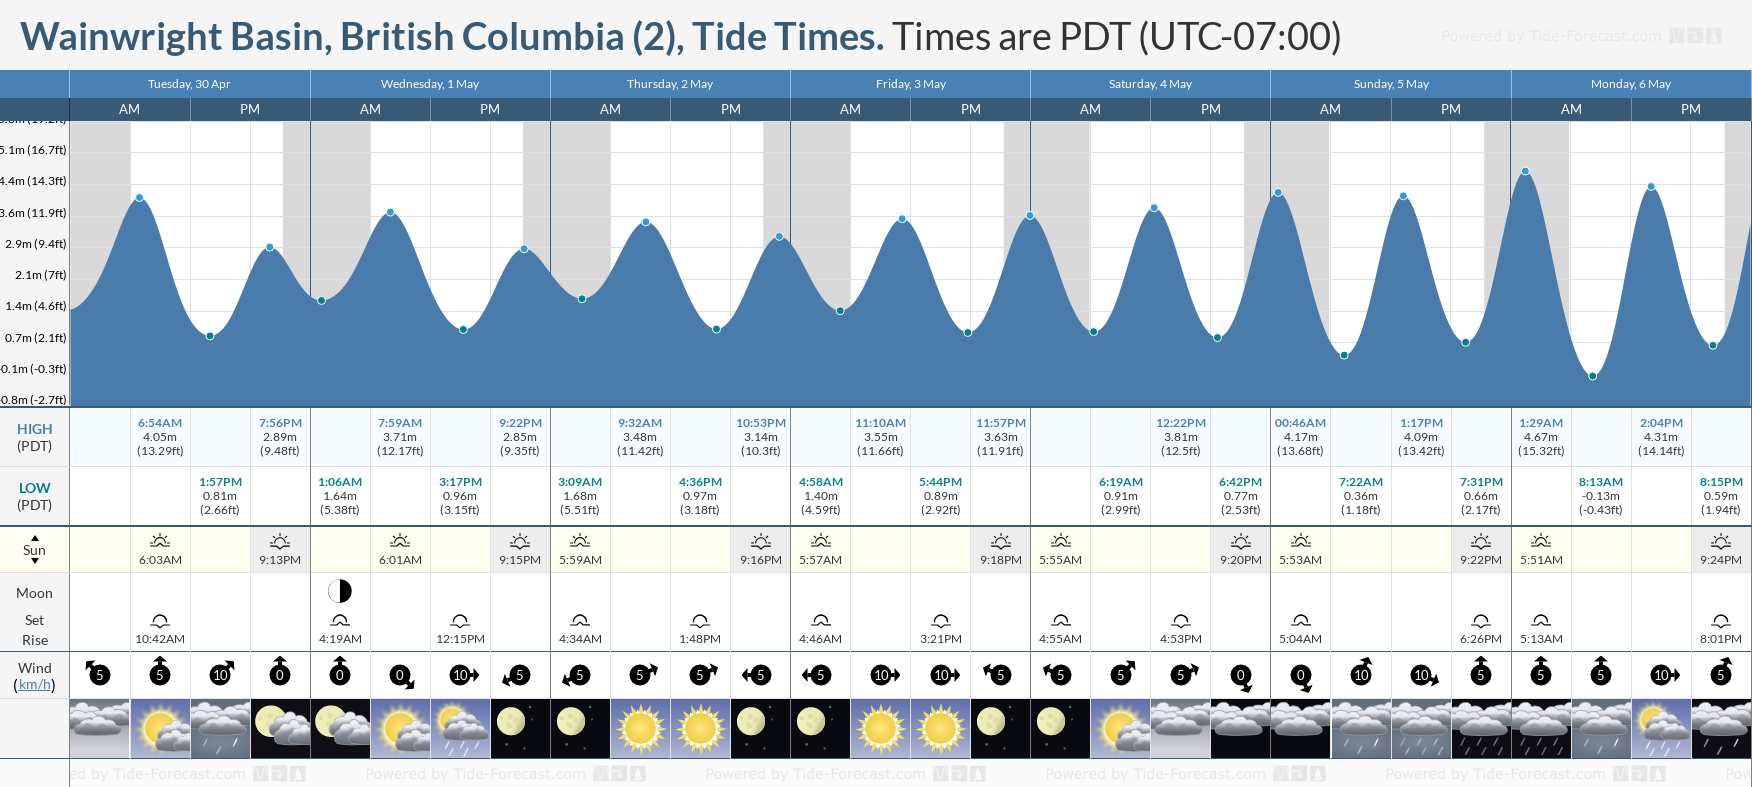 Wainwright Basin, British Columbia (2) Tide Chart including high and low tide tide times for the next 7 days